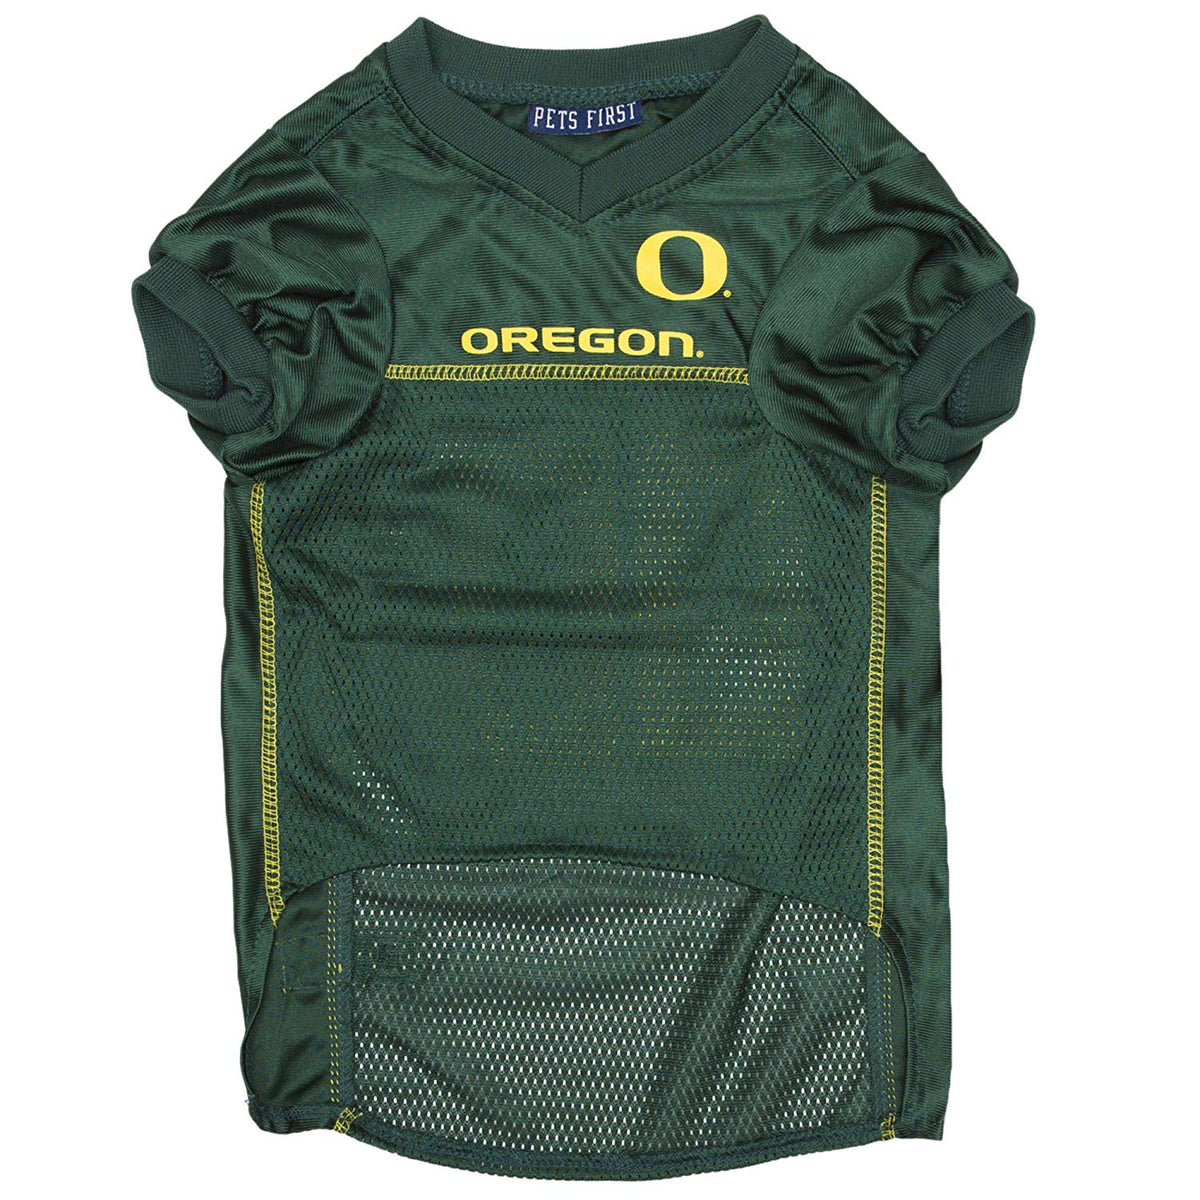 OR Ducks Pet Jersey - 3 Red Rovers